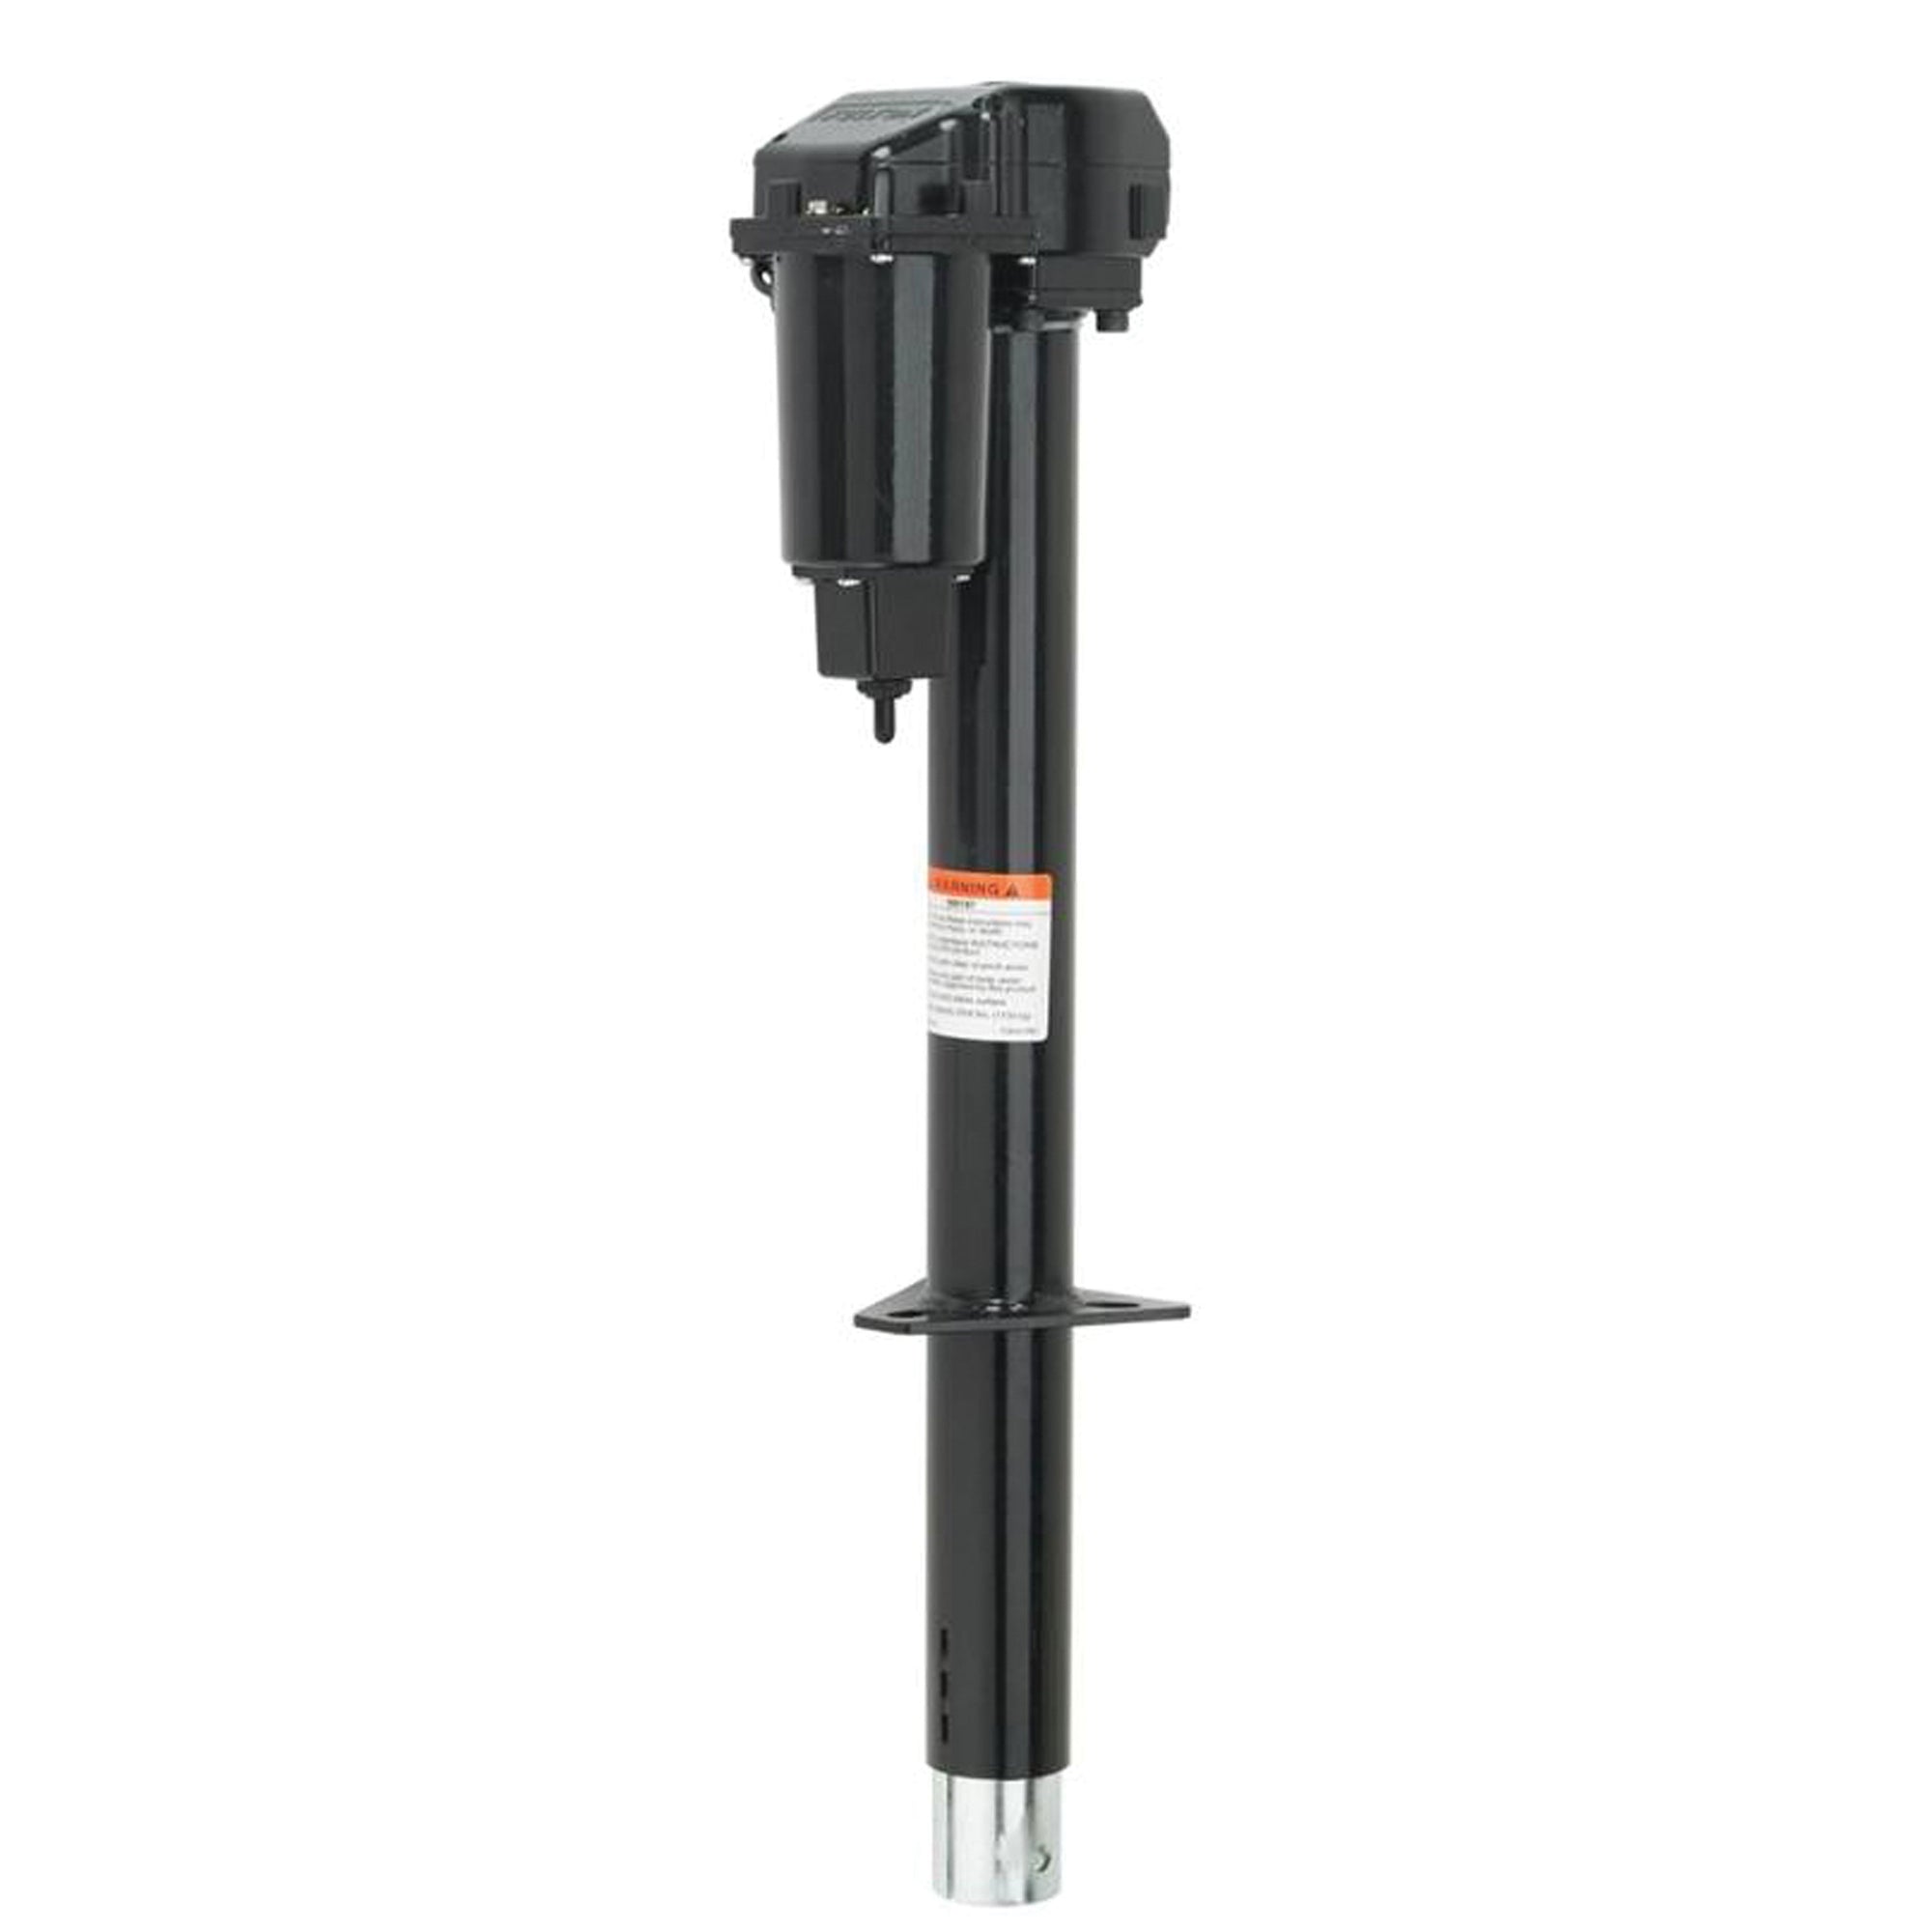 Reese 500198 Powered Drive A-Frame Jack - 2500 lbs. Lift Capacity